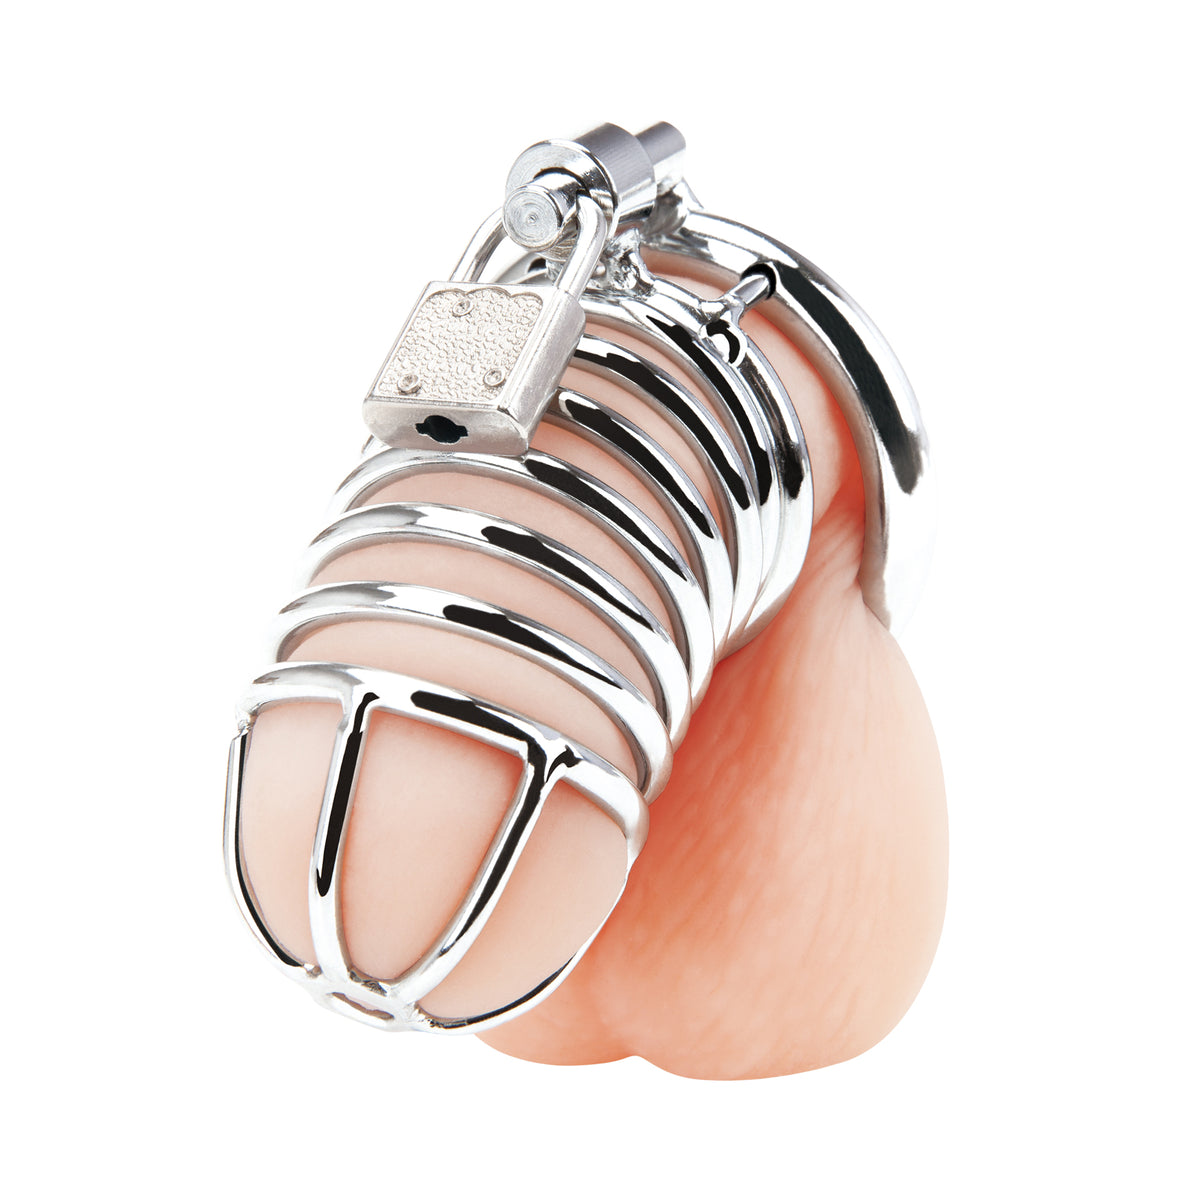 Blue Line - Deluxe Chastity Cage